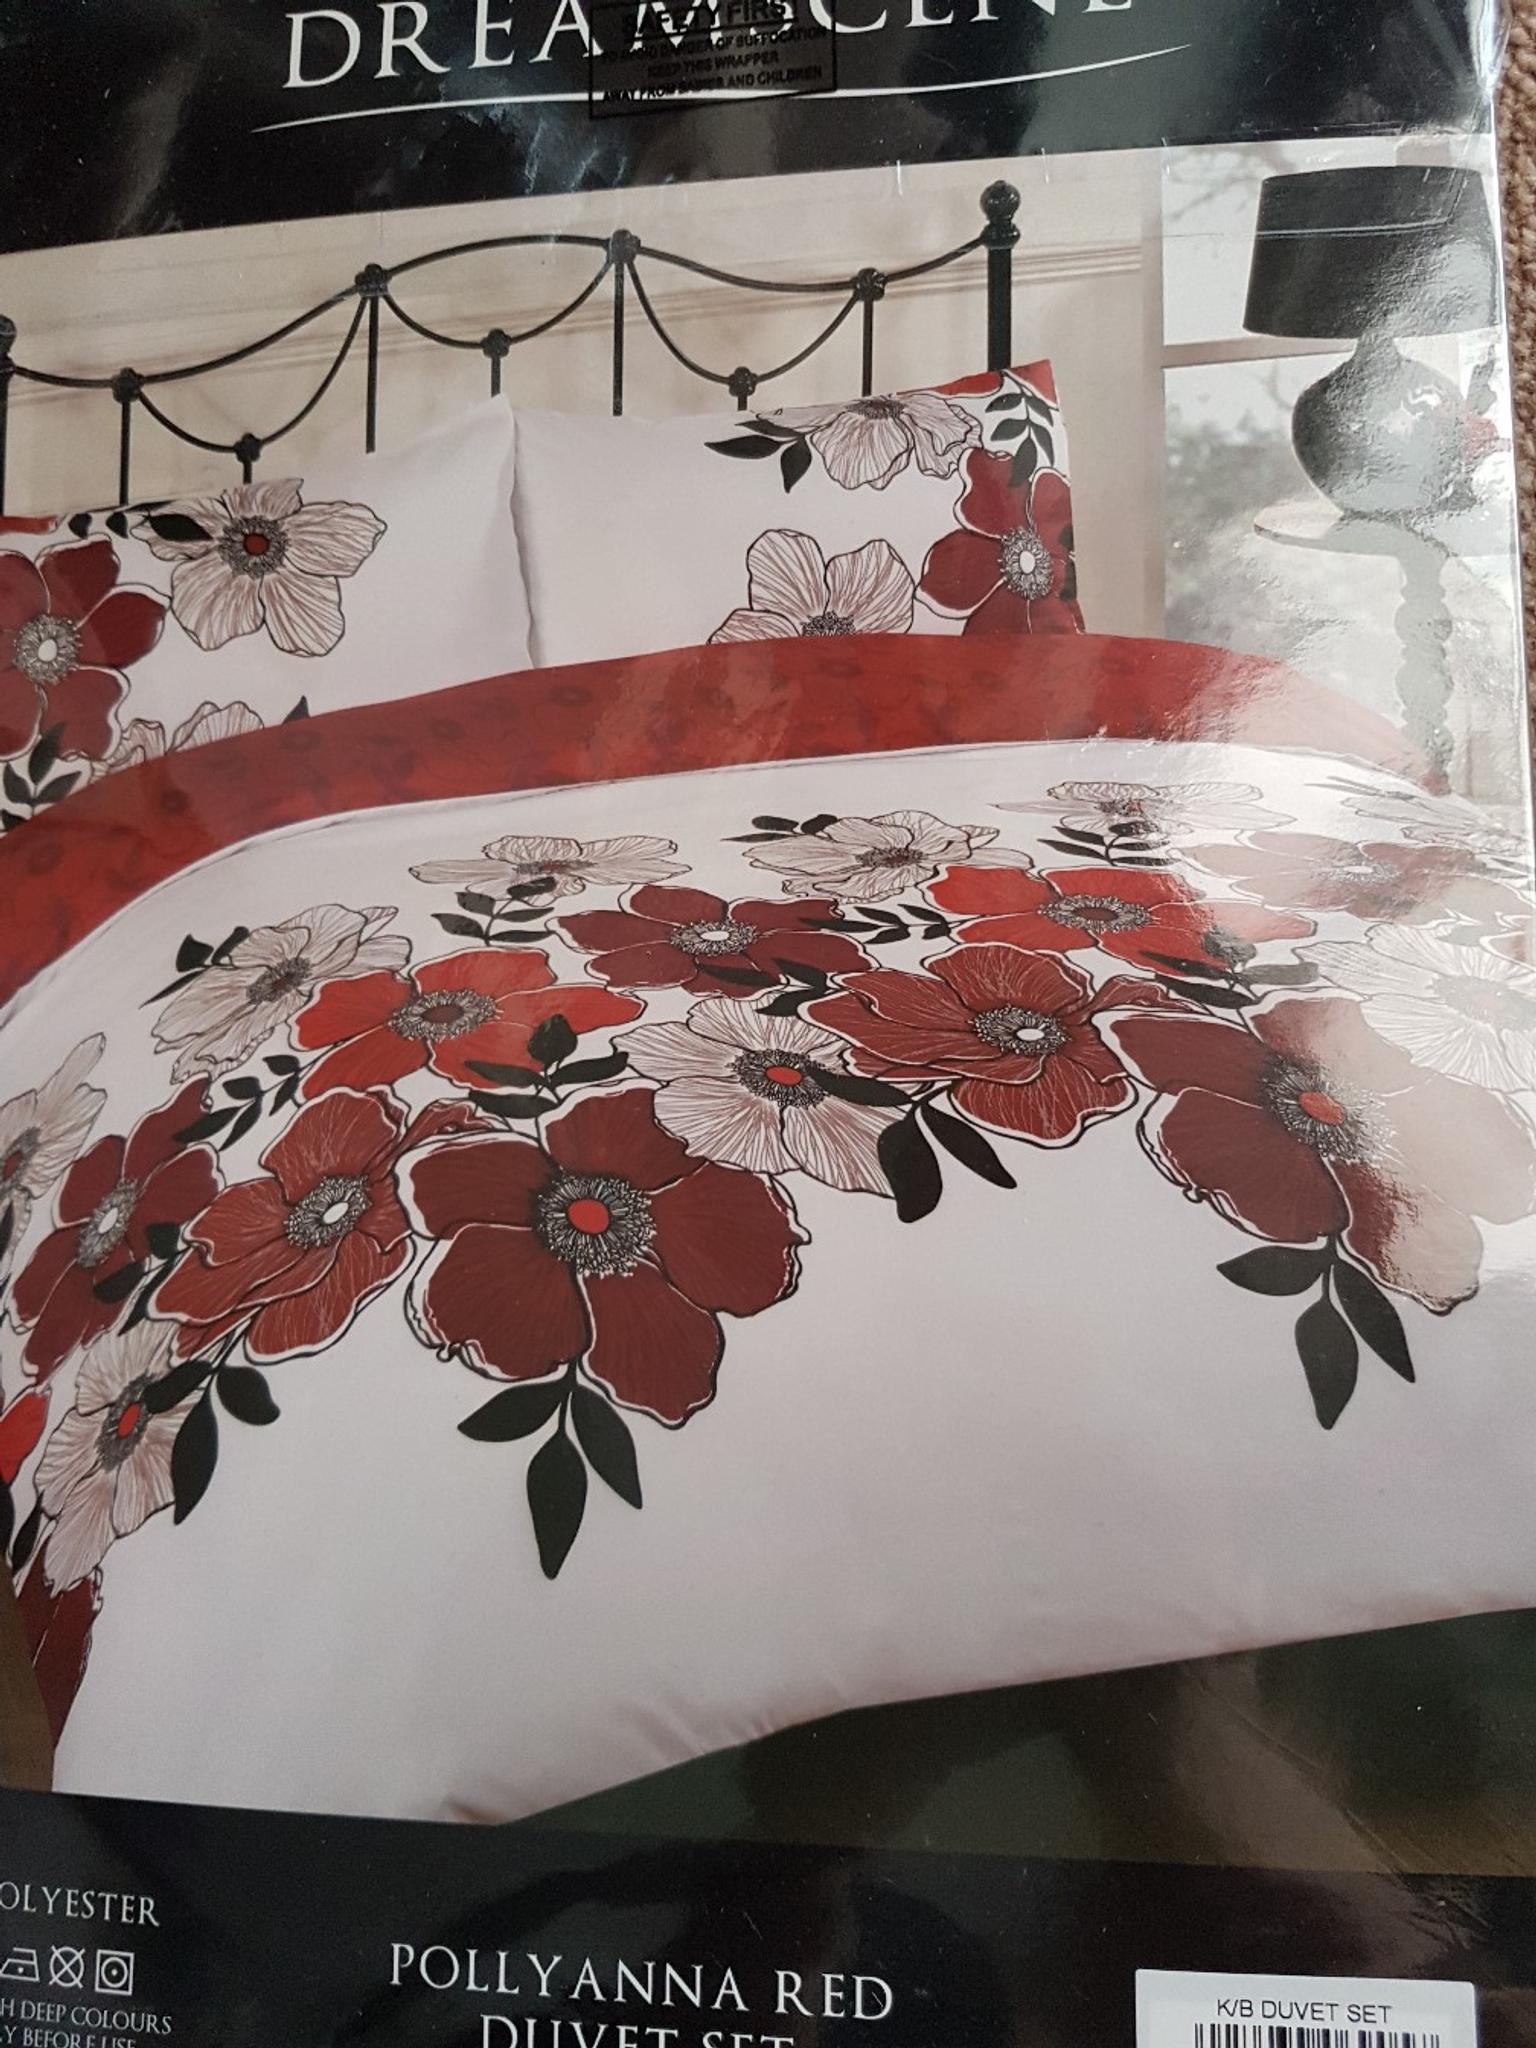 King Size Duvet Cover Set In B64 Dudley For 12 00 For Sale Shpock